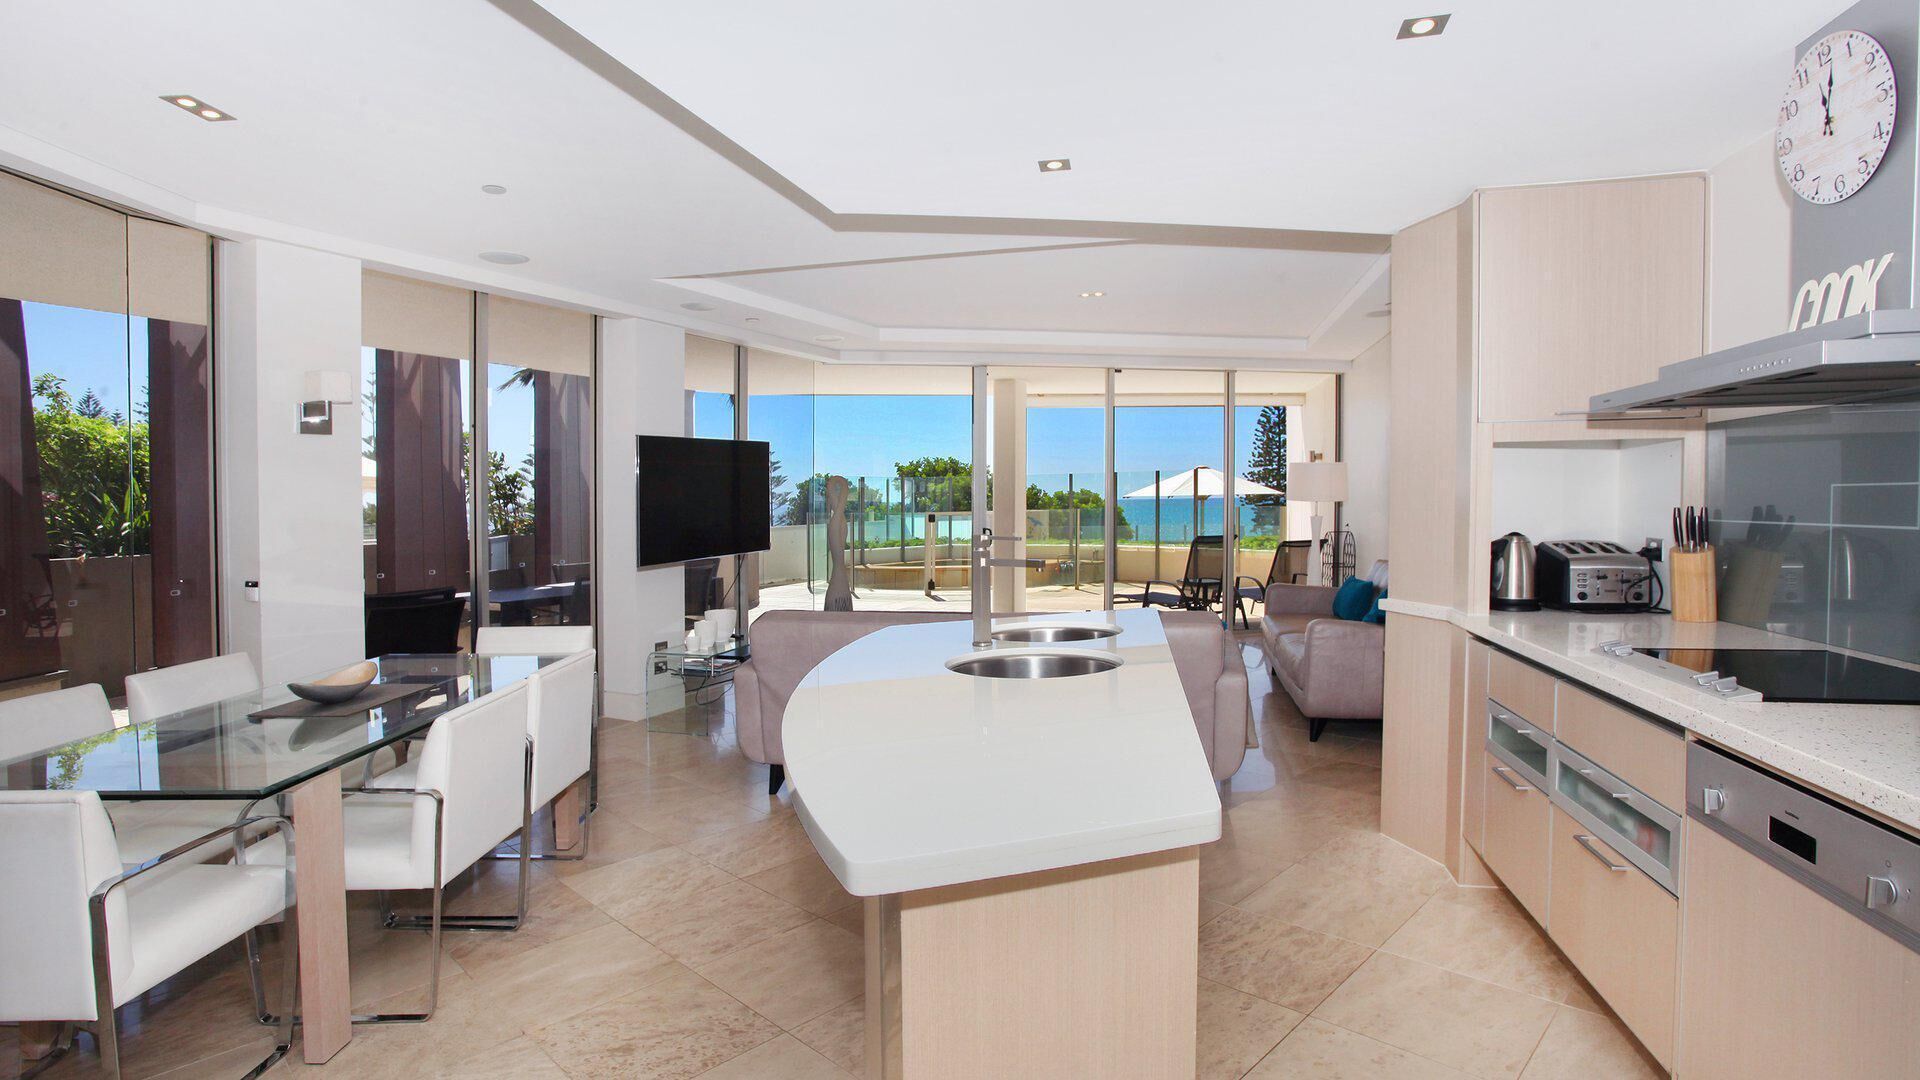 Oceans 201 - 3 Bedroom Unit With Spa Located on the Mooloolaba Esplanade